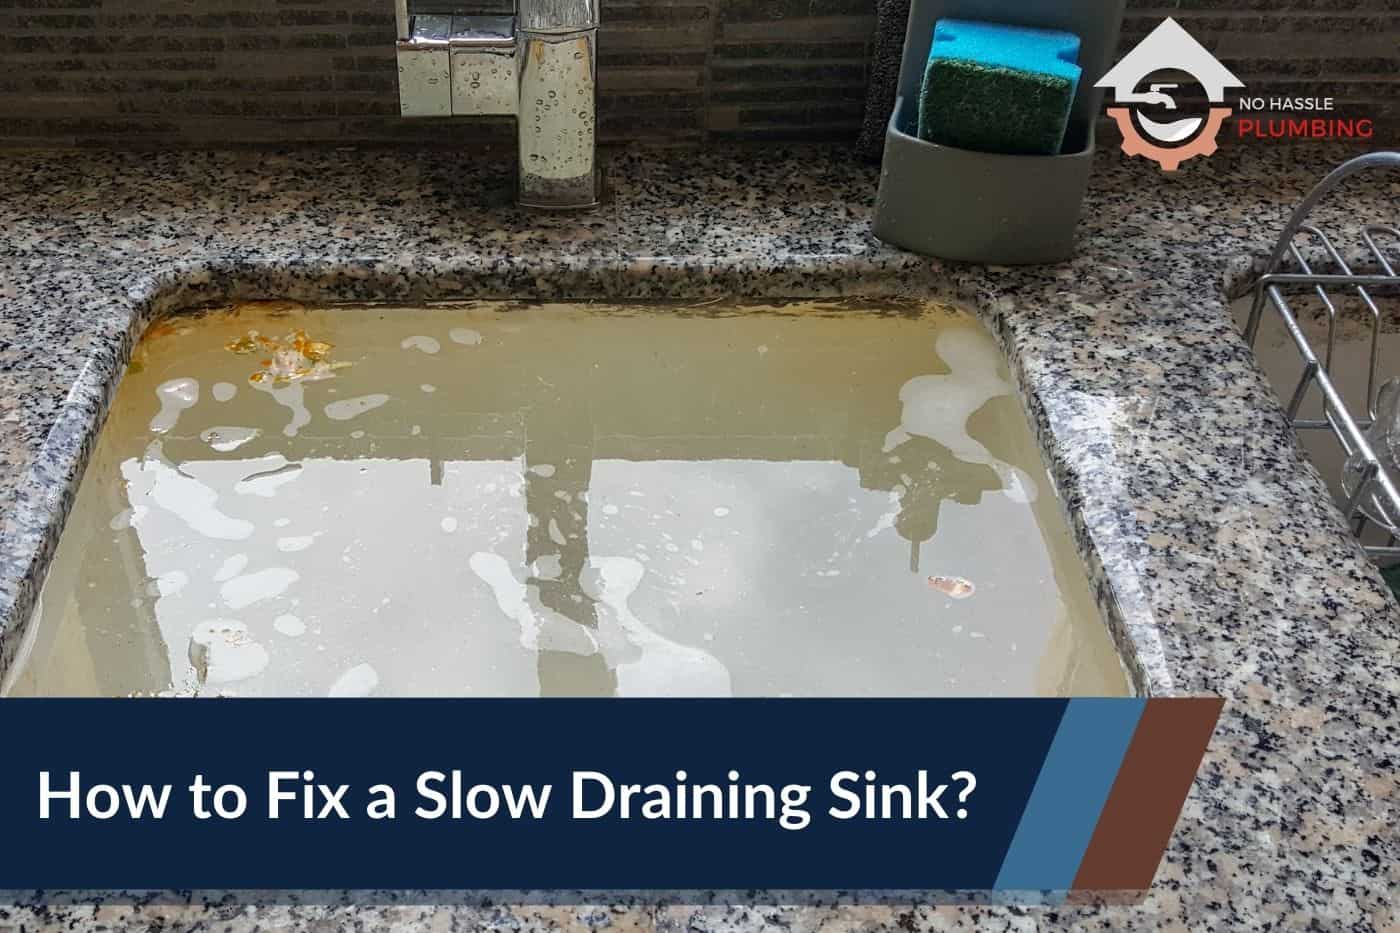 How to Fix a Slow Draining Sink - No Hassle Plumbing.com Feature Image of an kitchen sink full of dirty standing water